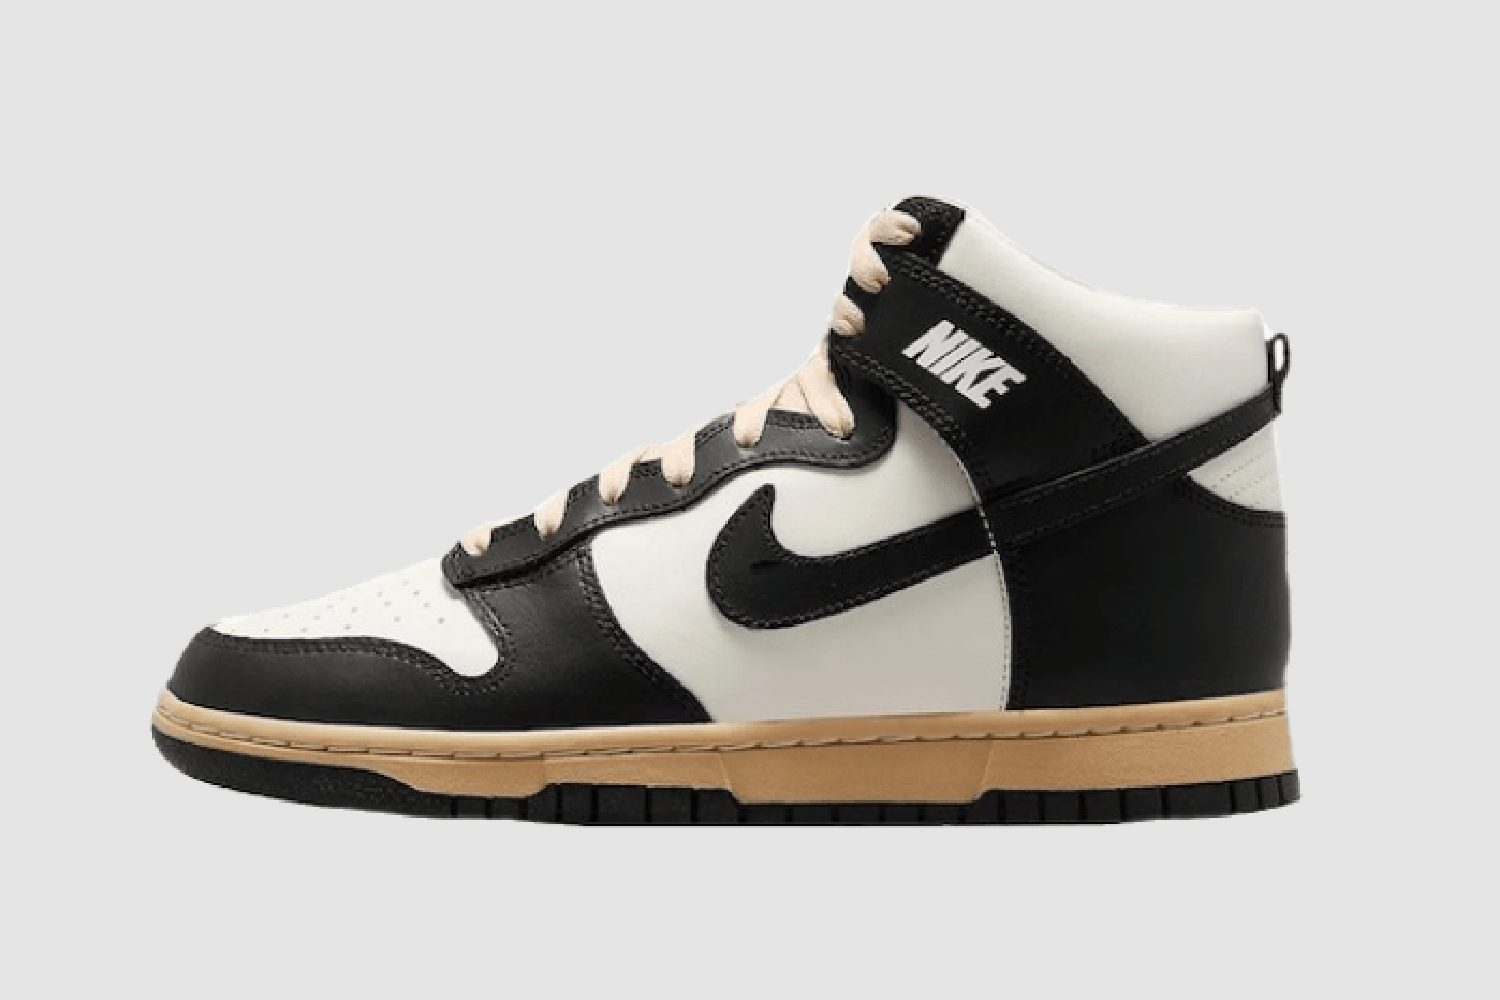 The Nike Dunk High Panda comes in Vintage